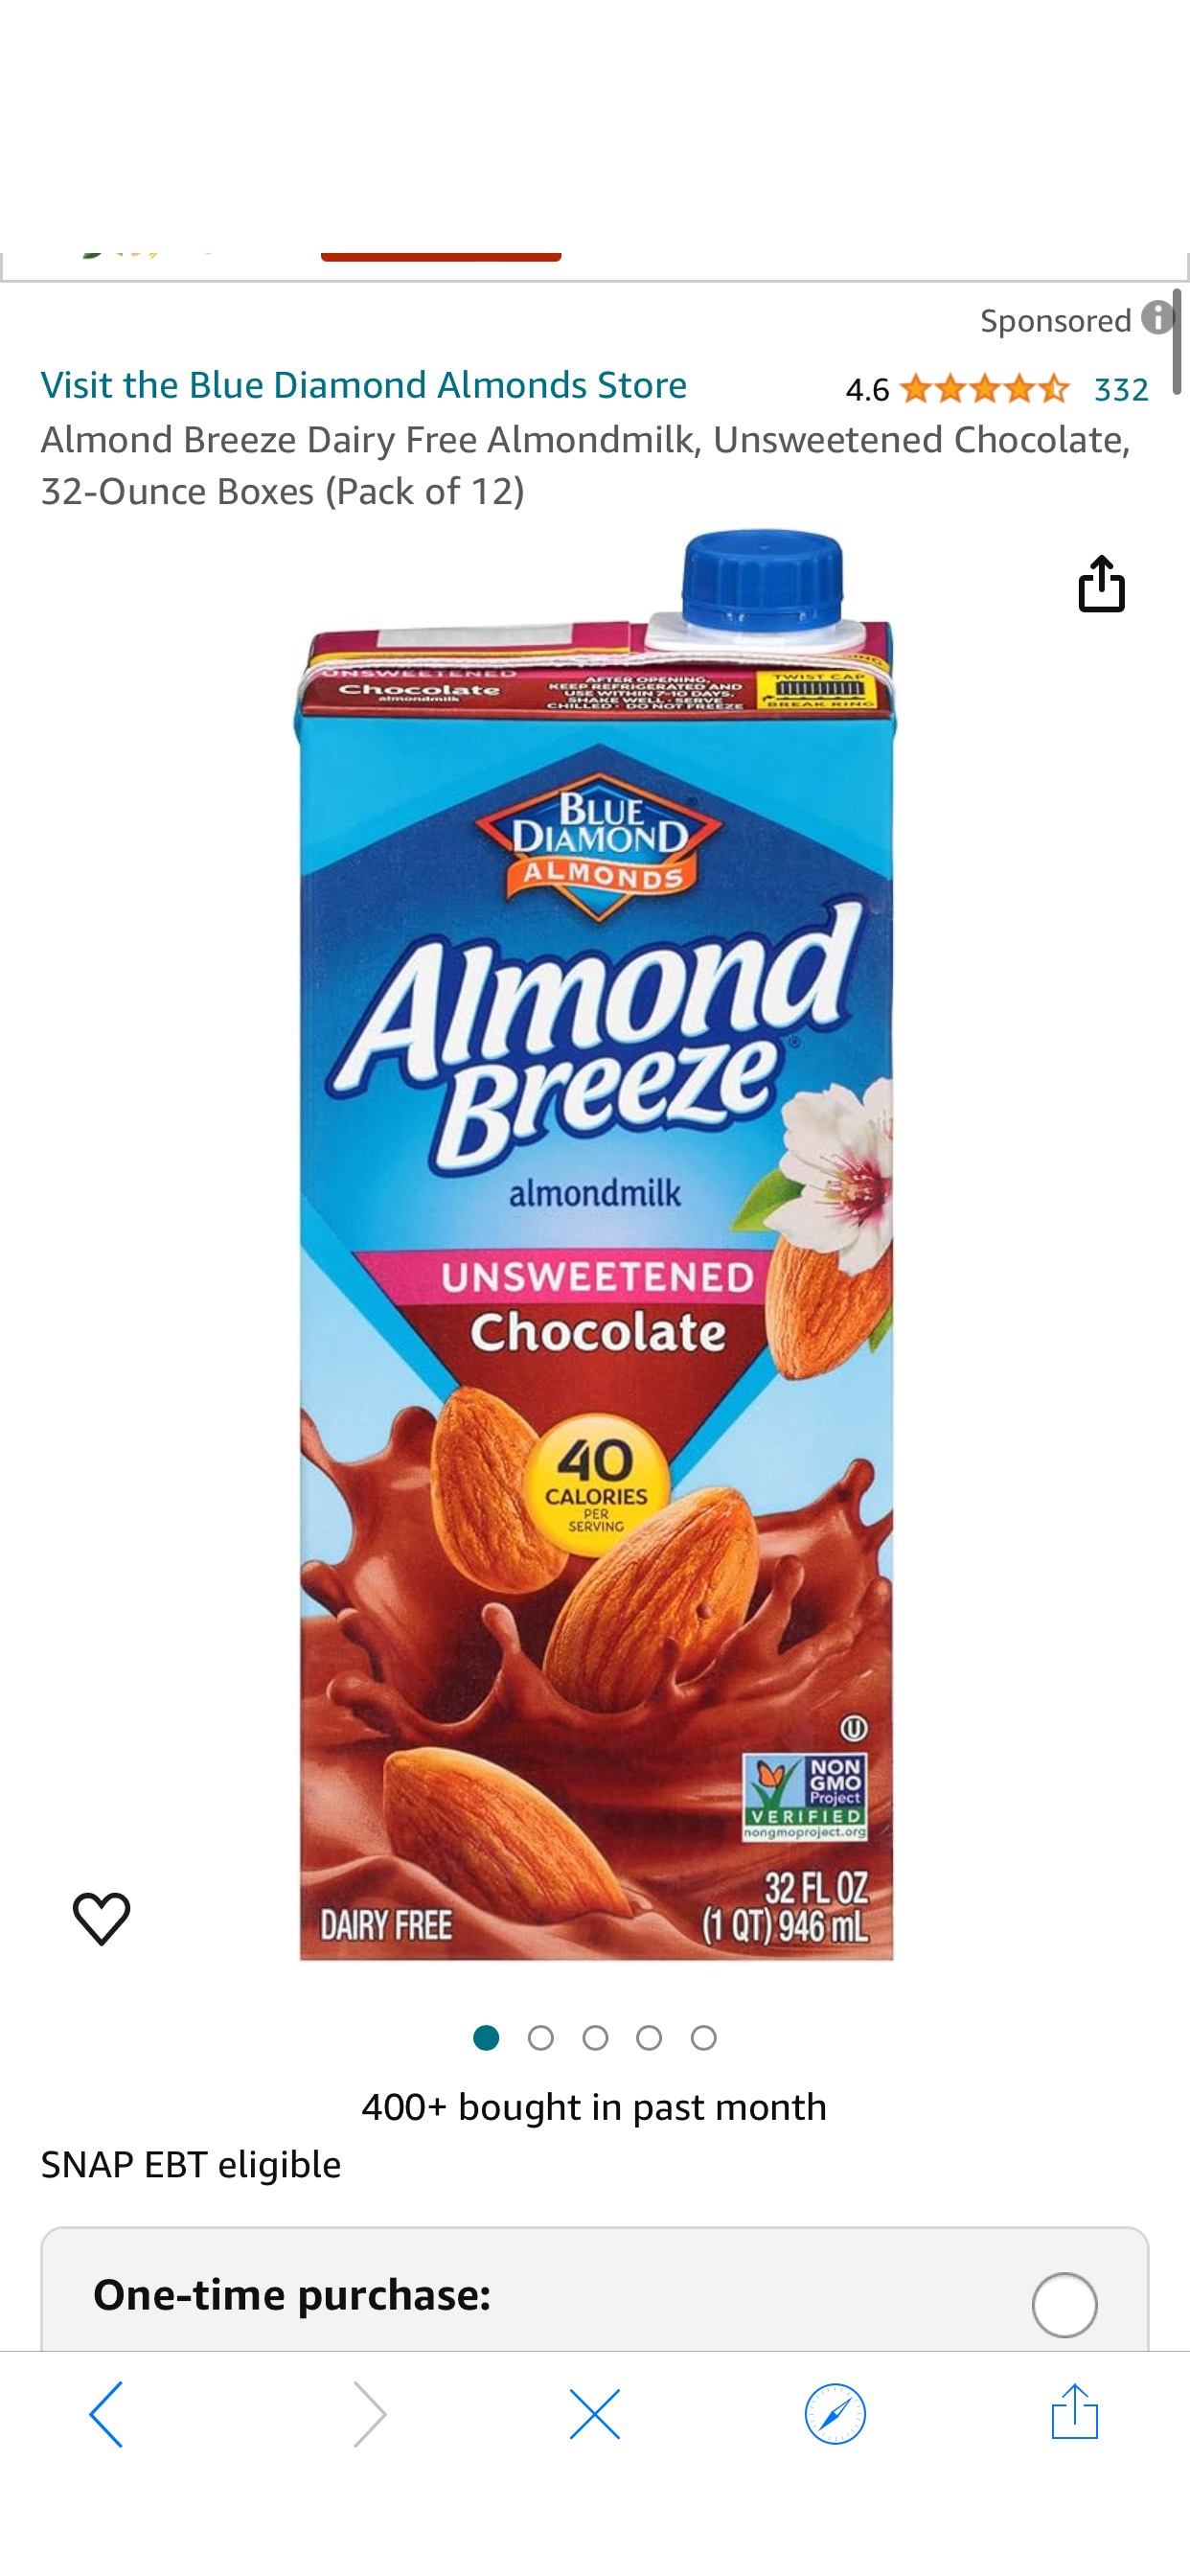 Amazon.com: Almond Breeze Dairy Free Almondmilk, Unsweetened Chocolate, 32-Ounce Boxes (Pack of 12) : Grocery & Gourmet Food 杏仁奶12瓶